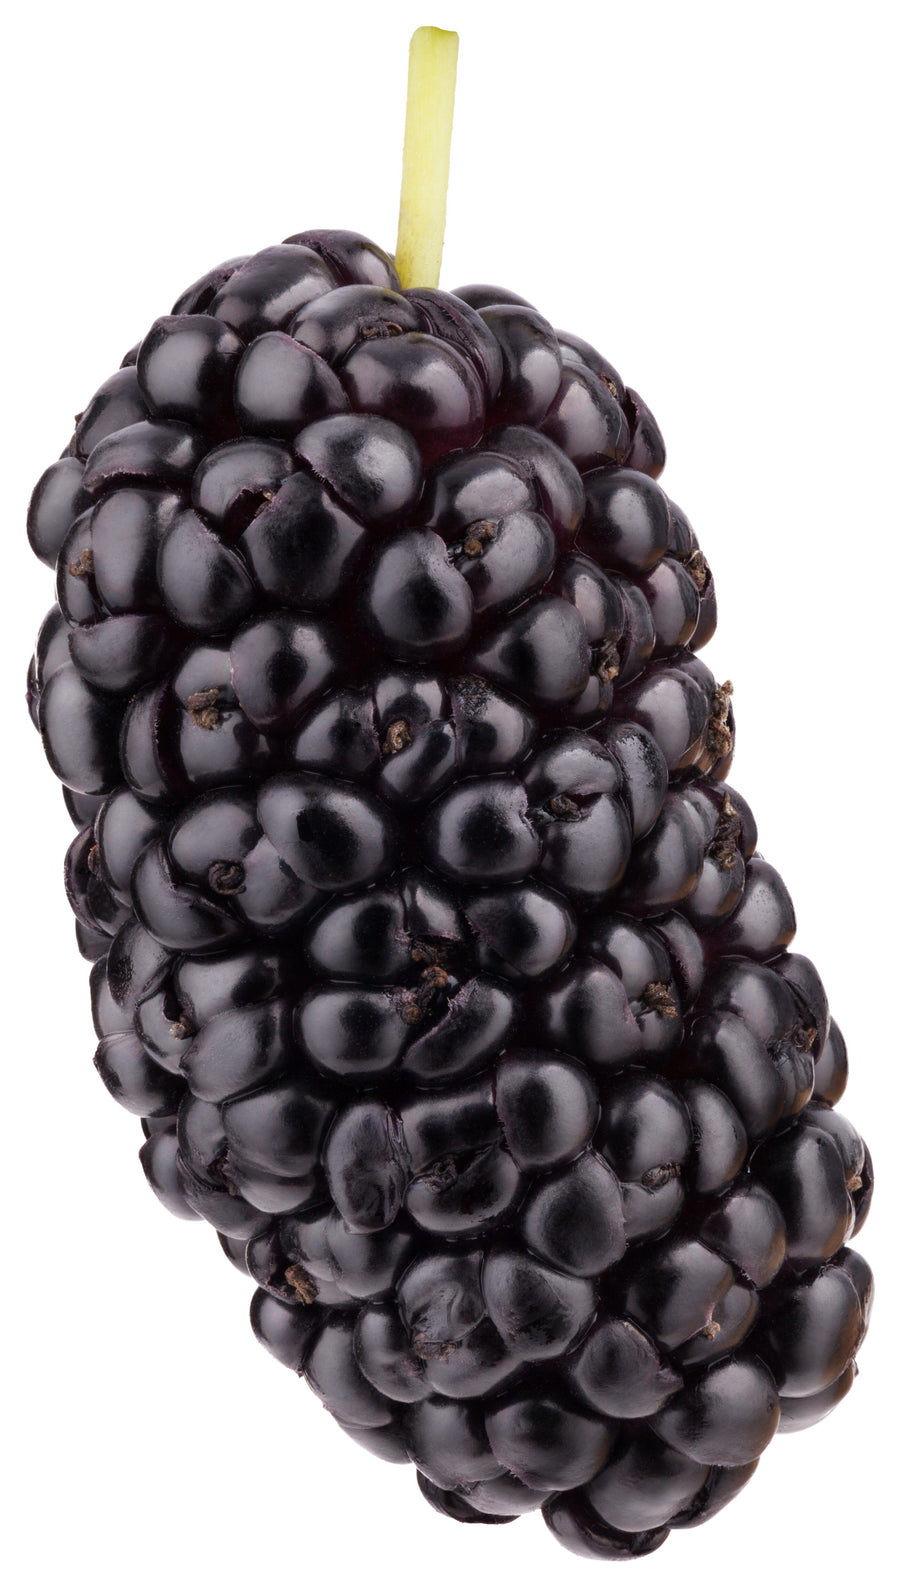 Image of a black mulberry fruit